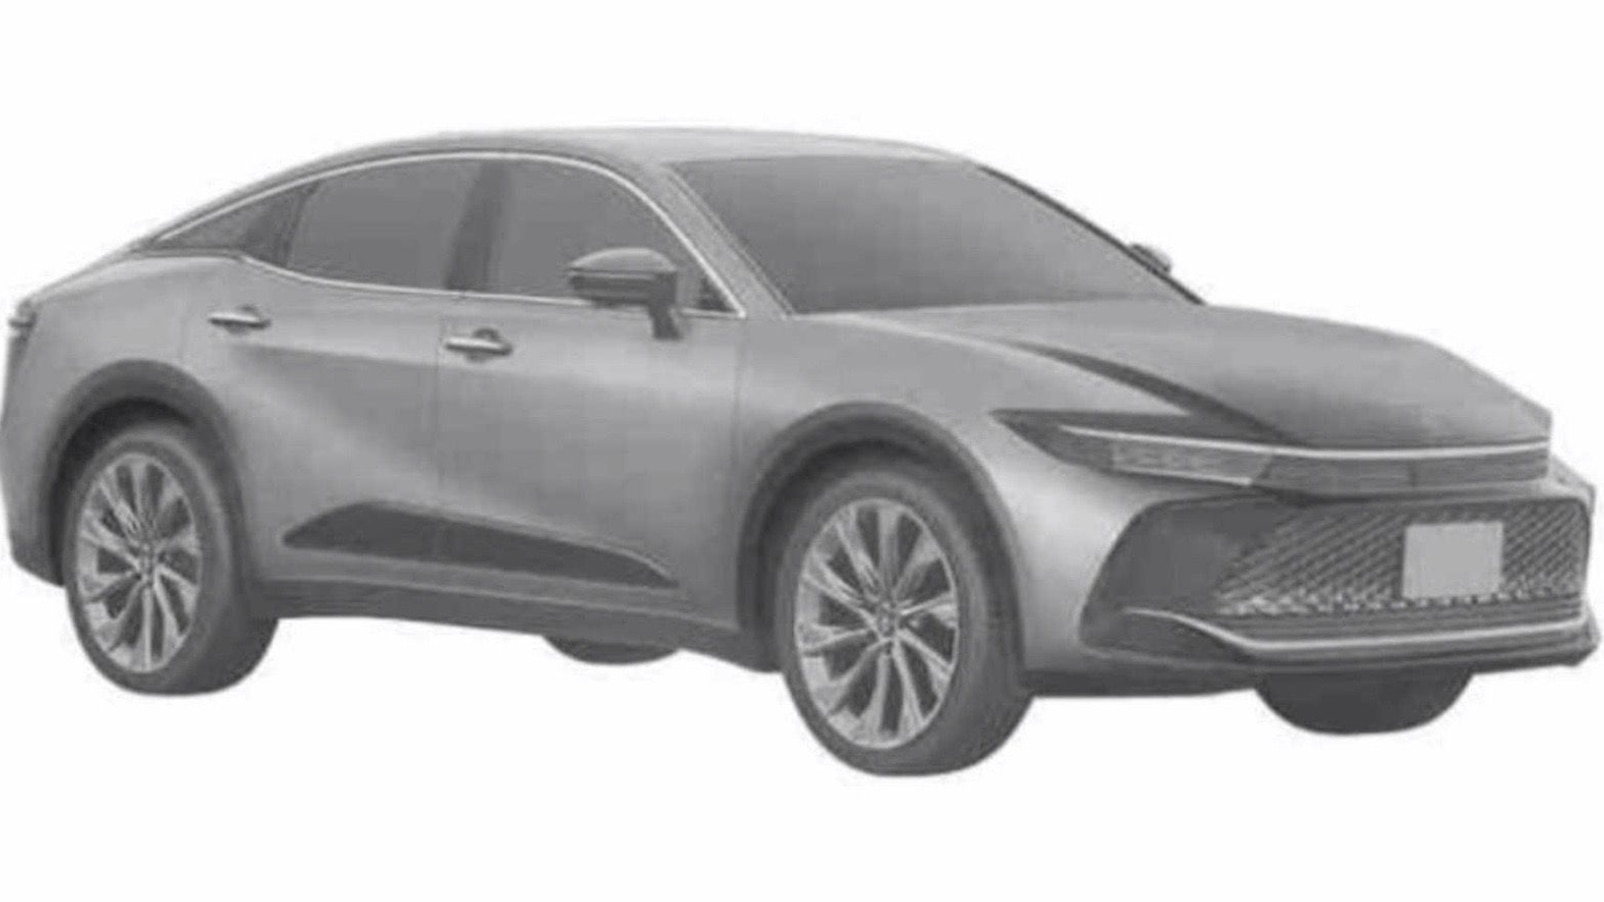 Alleged 2023 Toyota Crown patent image